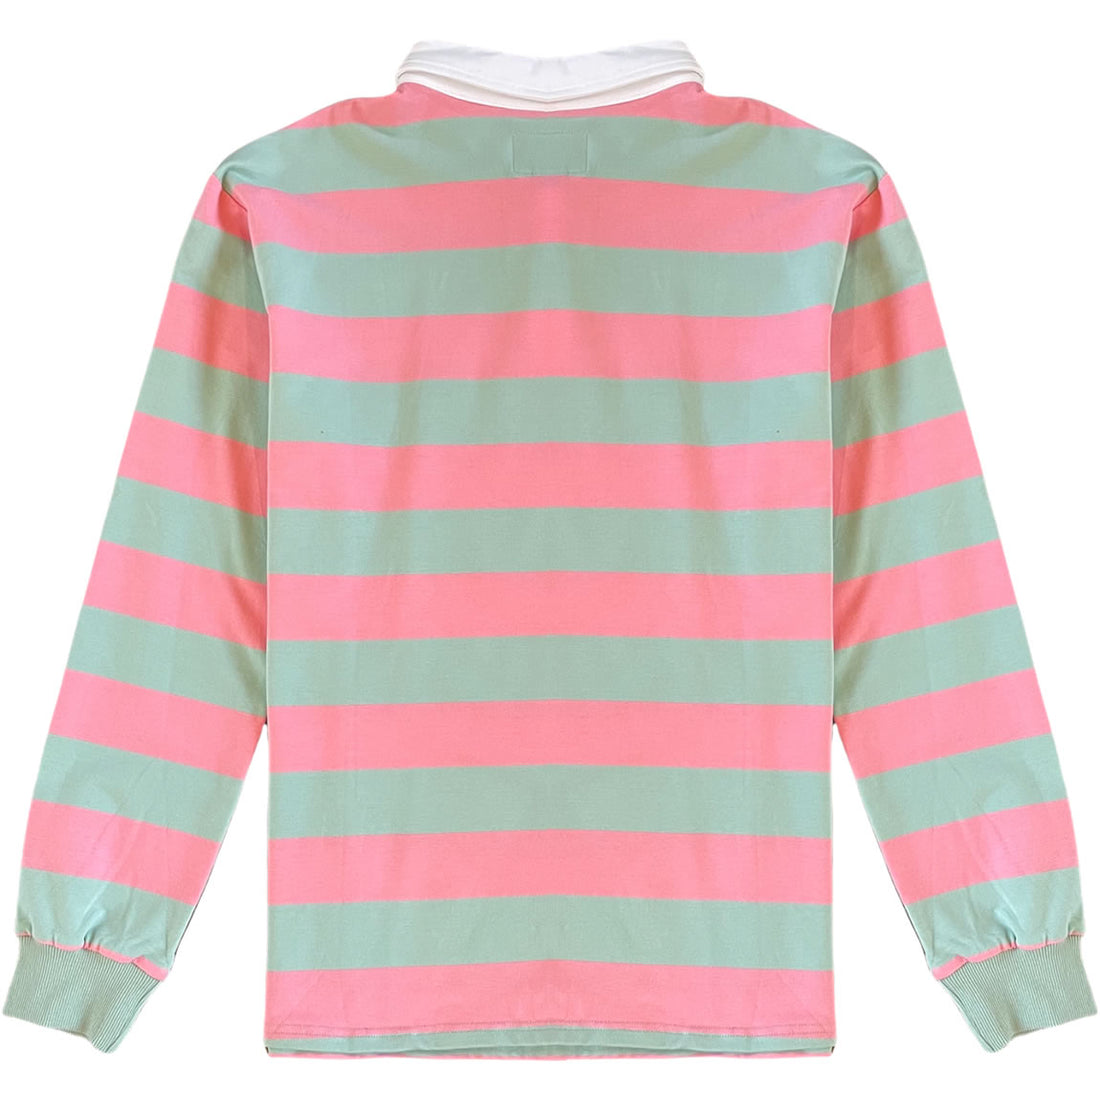 Pastel Pink and Mint Green White Striped Mens Long Sleeve Rugby Shirt